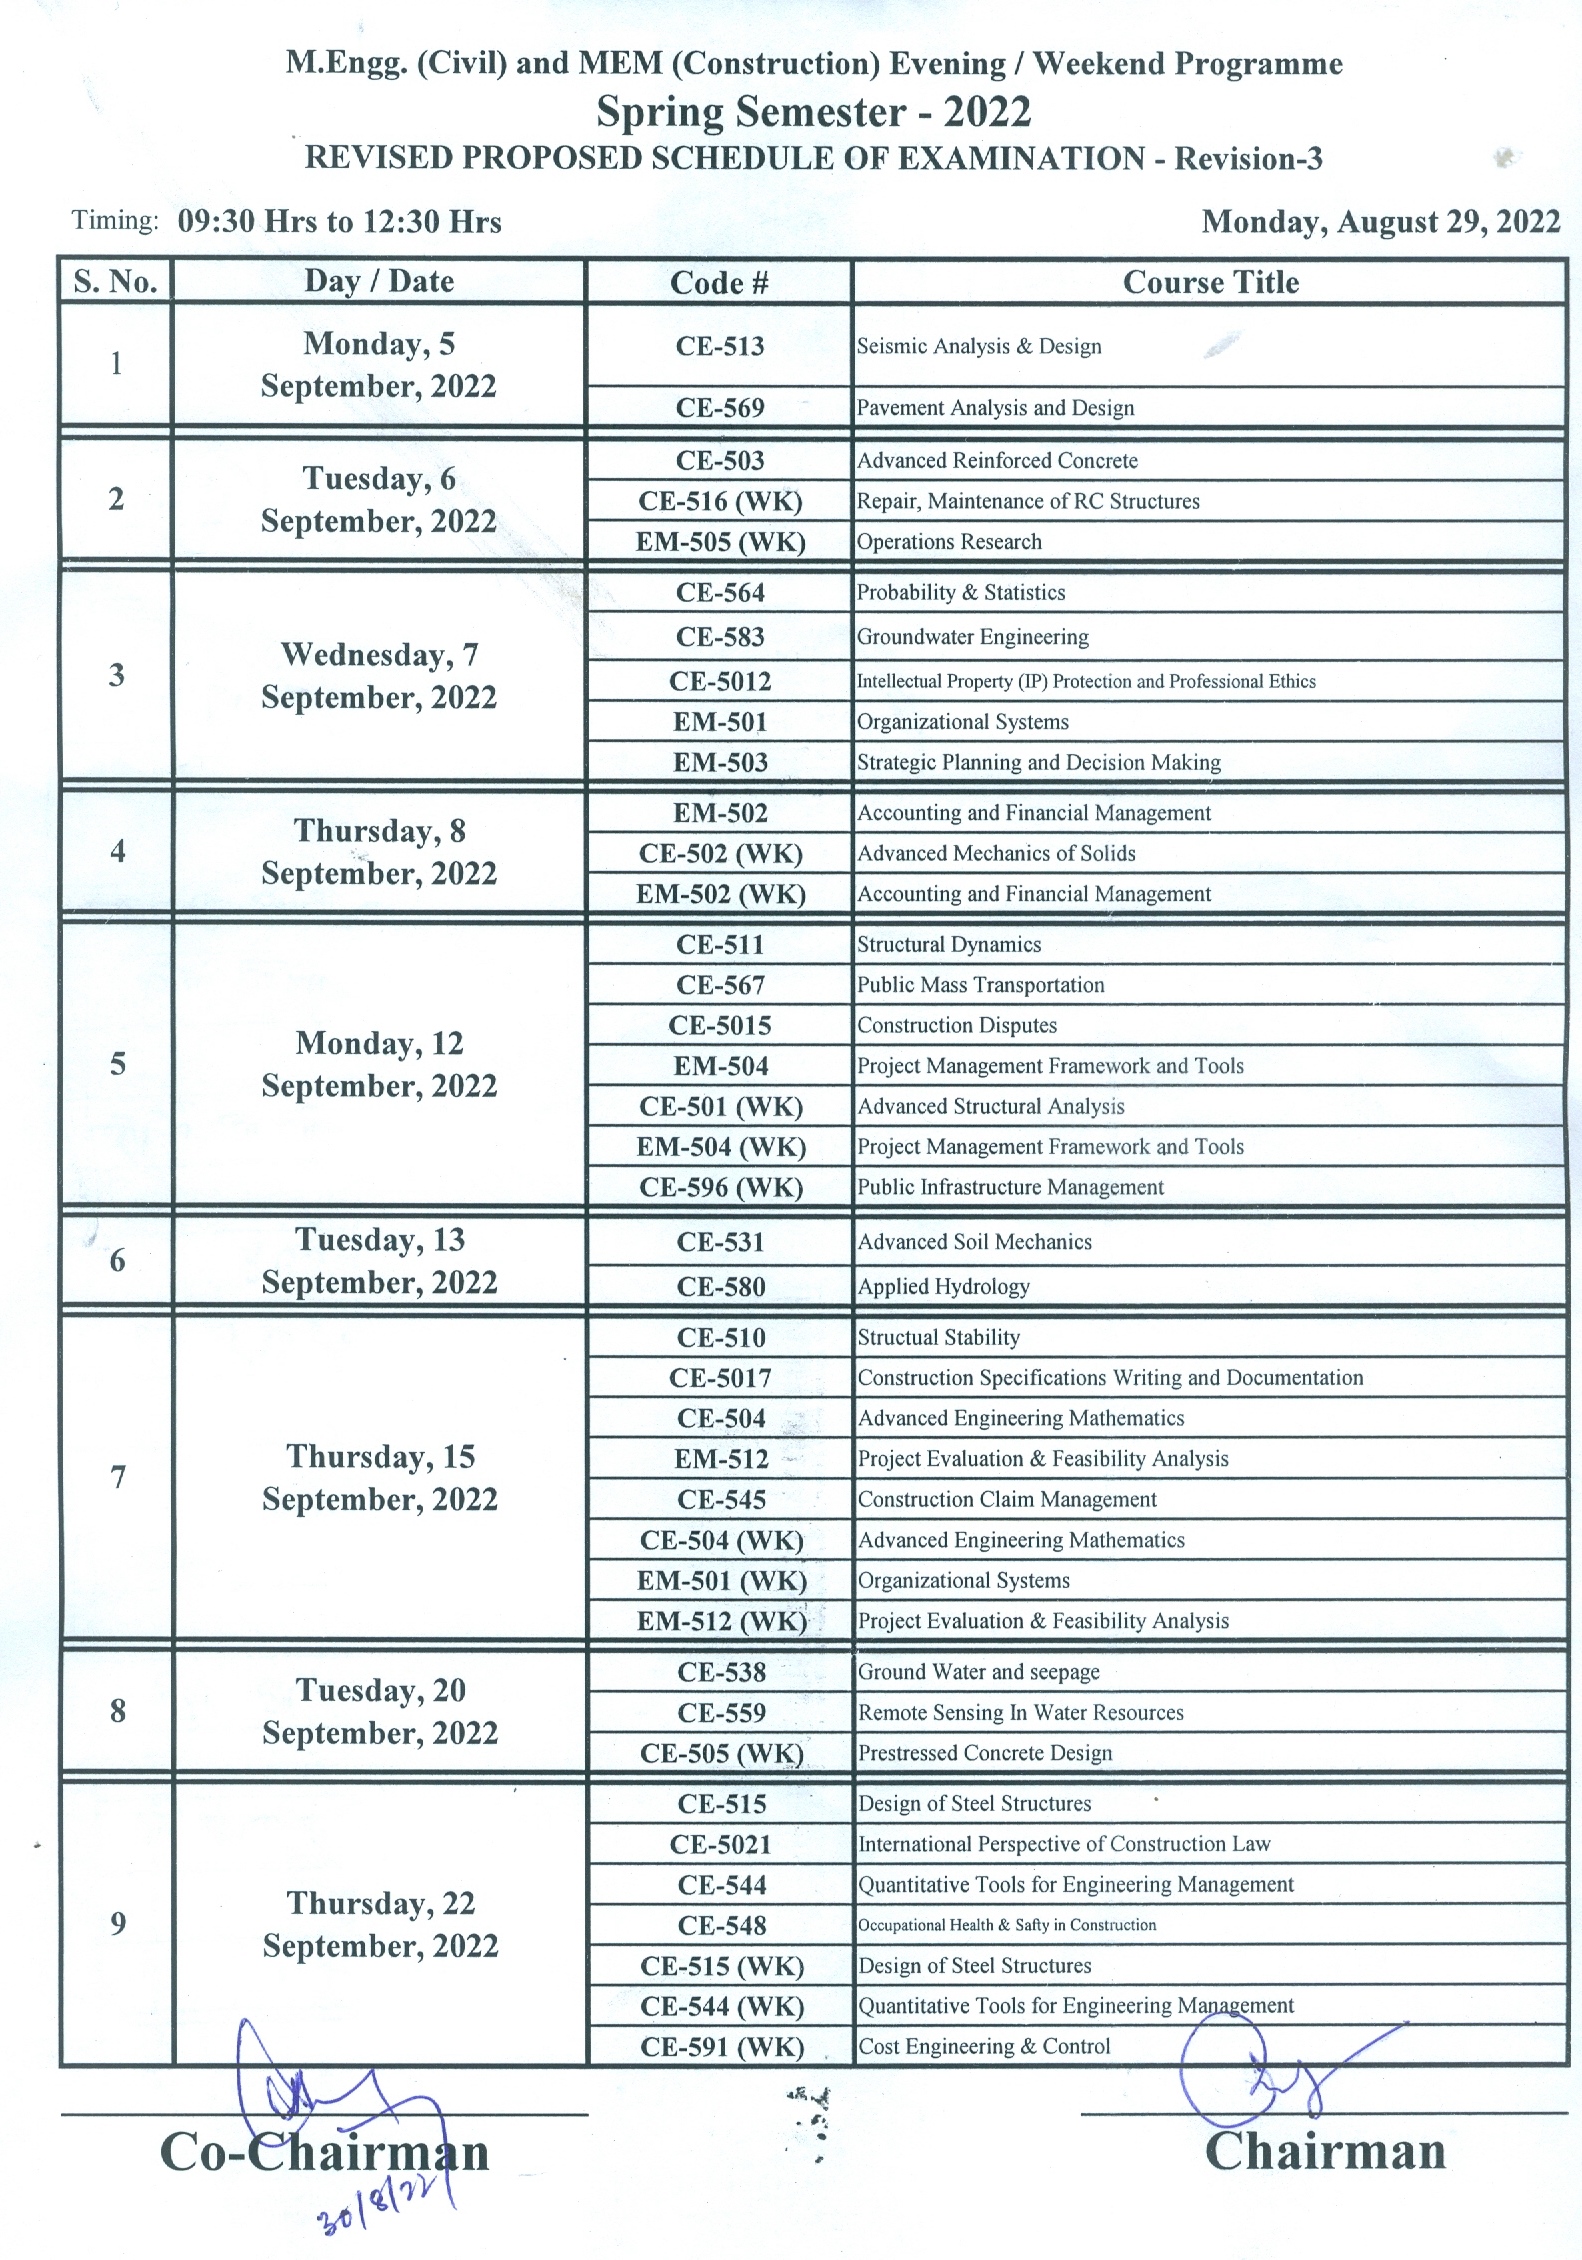 Revised Proposed Masters Exam Timetable For Spring 2022 | Department of